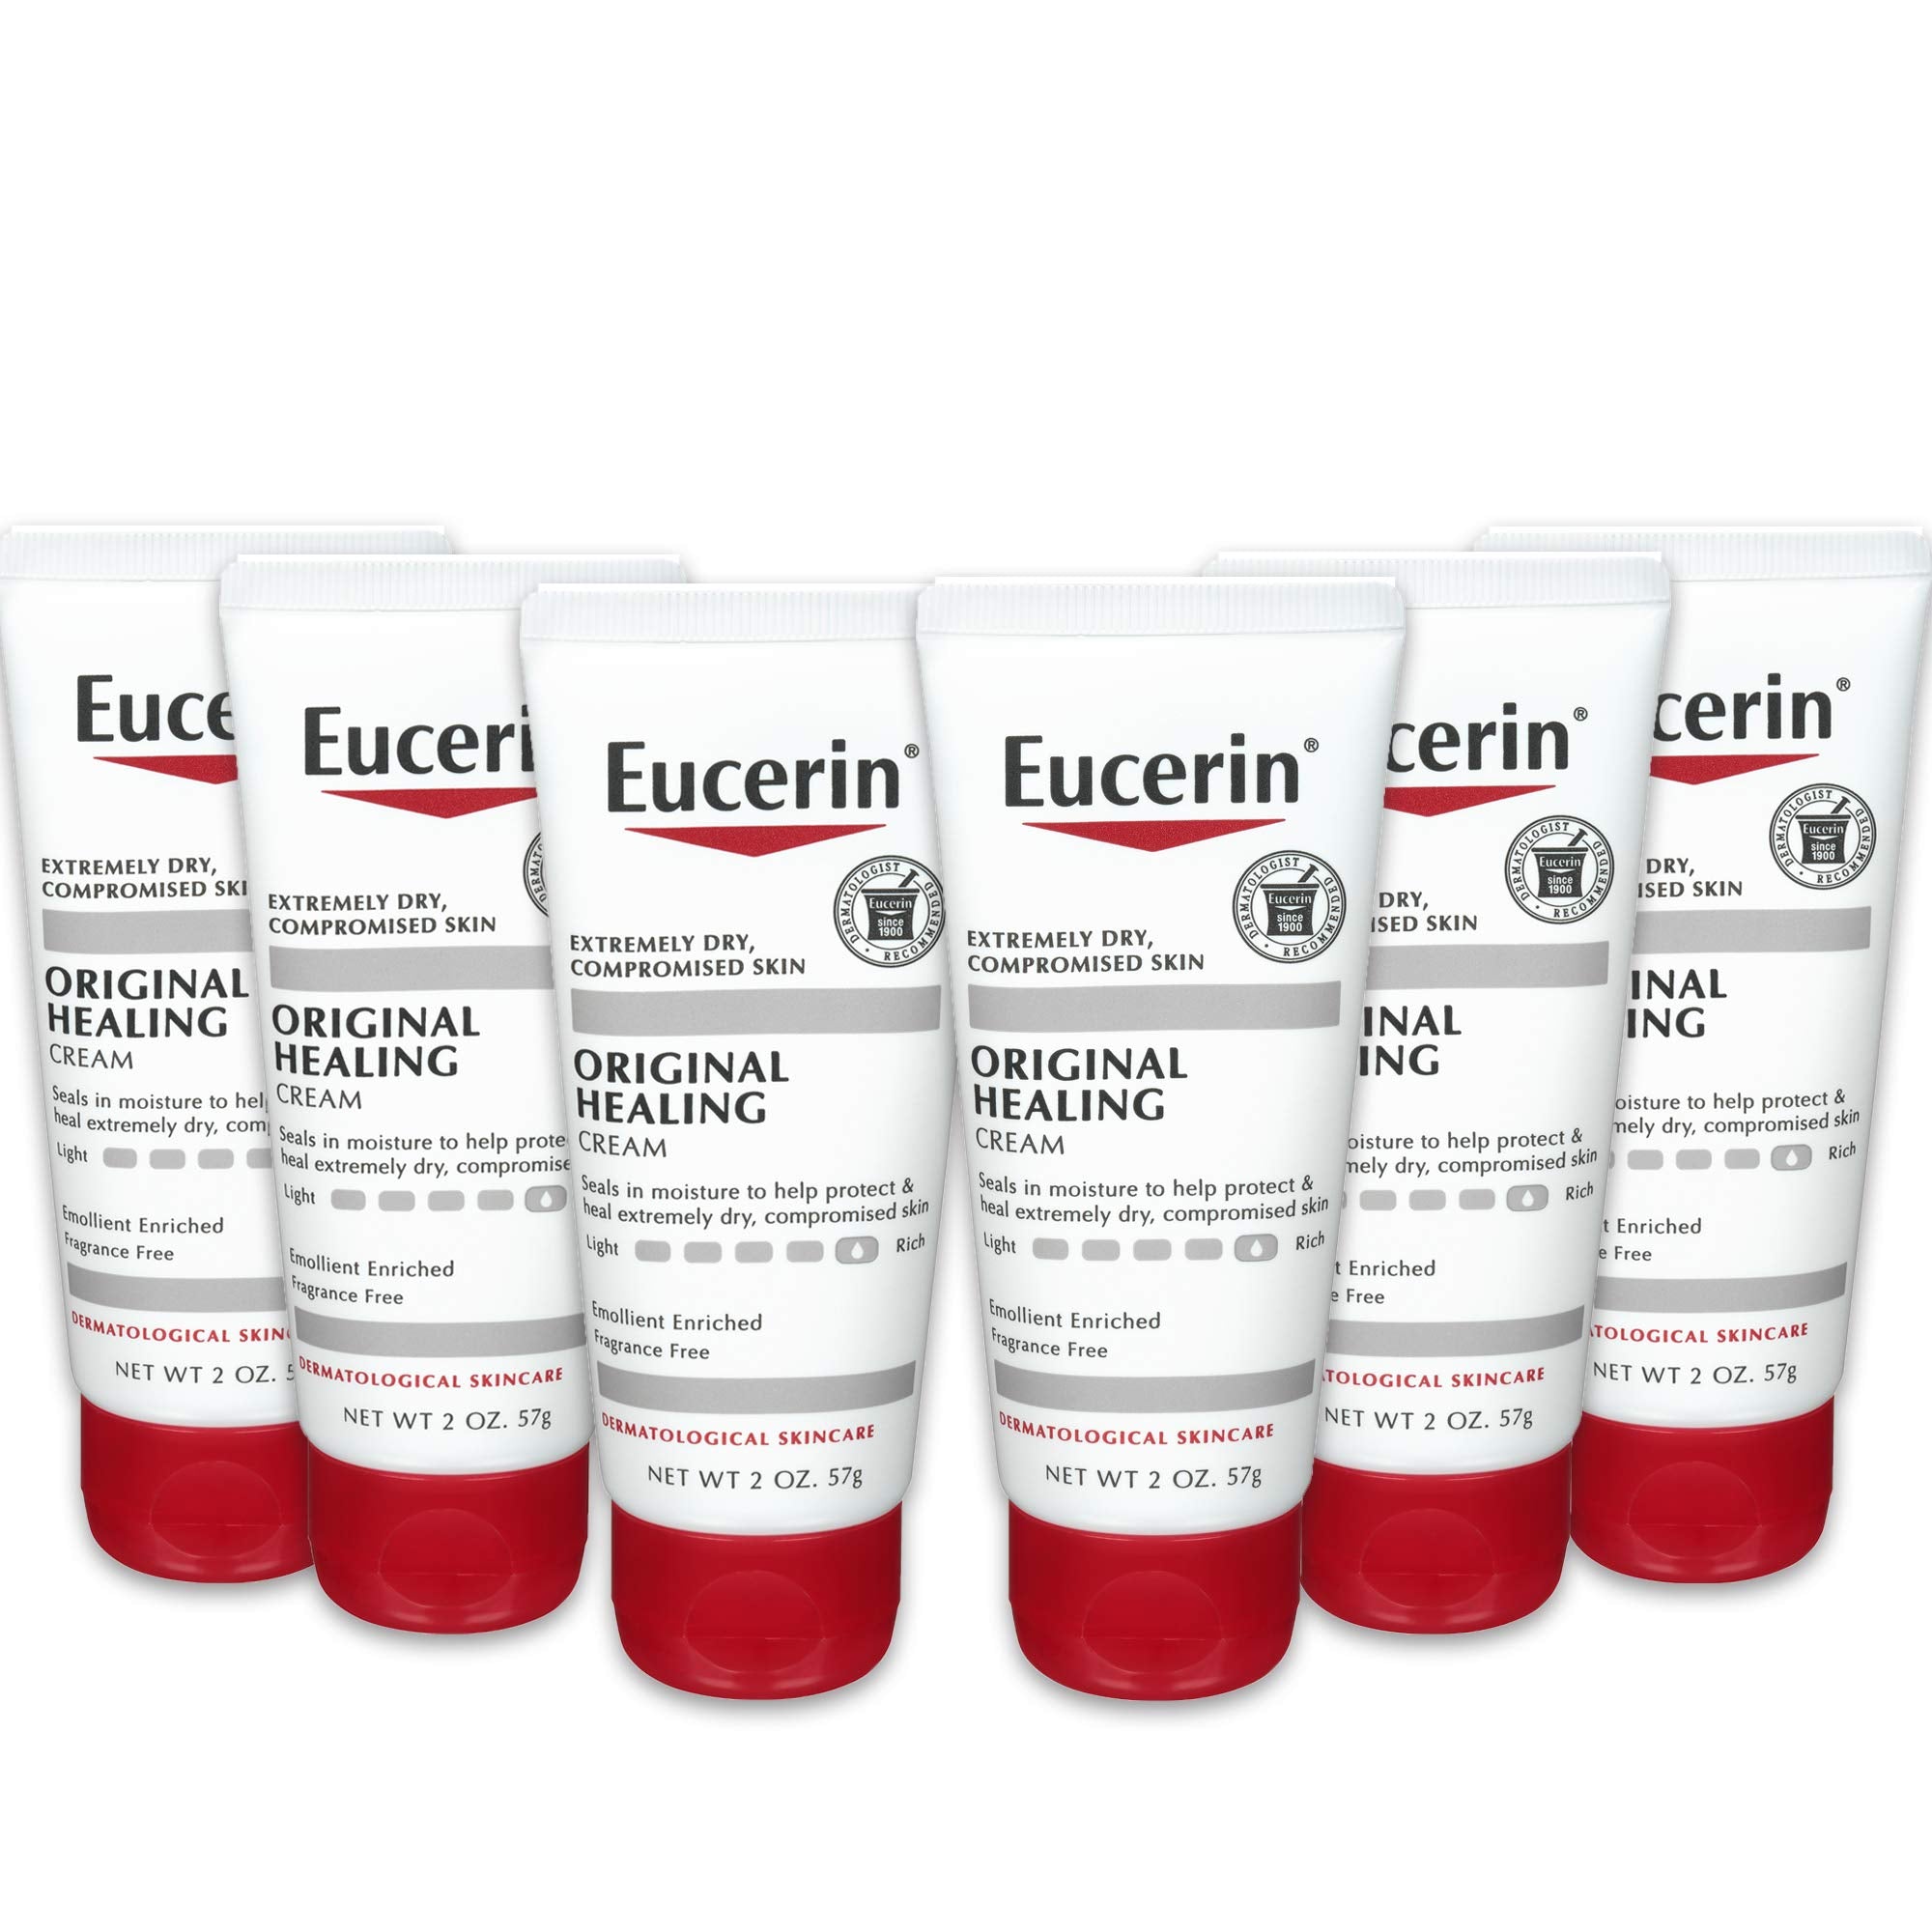 Eucerin Original Healing Cream - Fragrance Free, Rich Lotion for Extremely Dry Skin - 2 Ounce (Pack of 6)